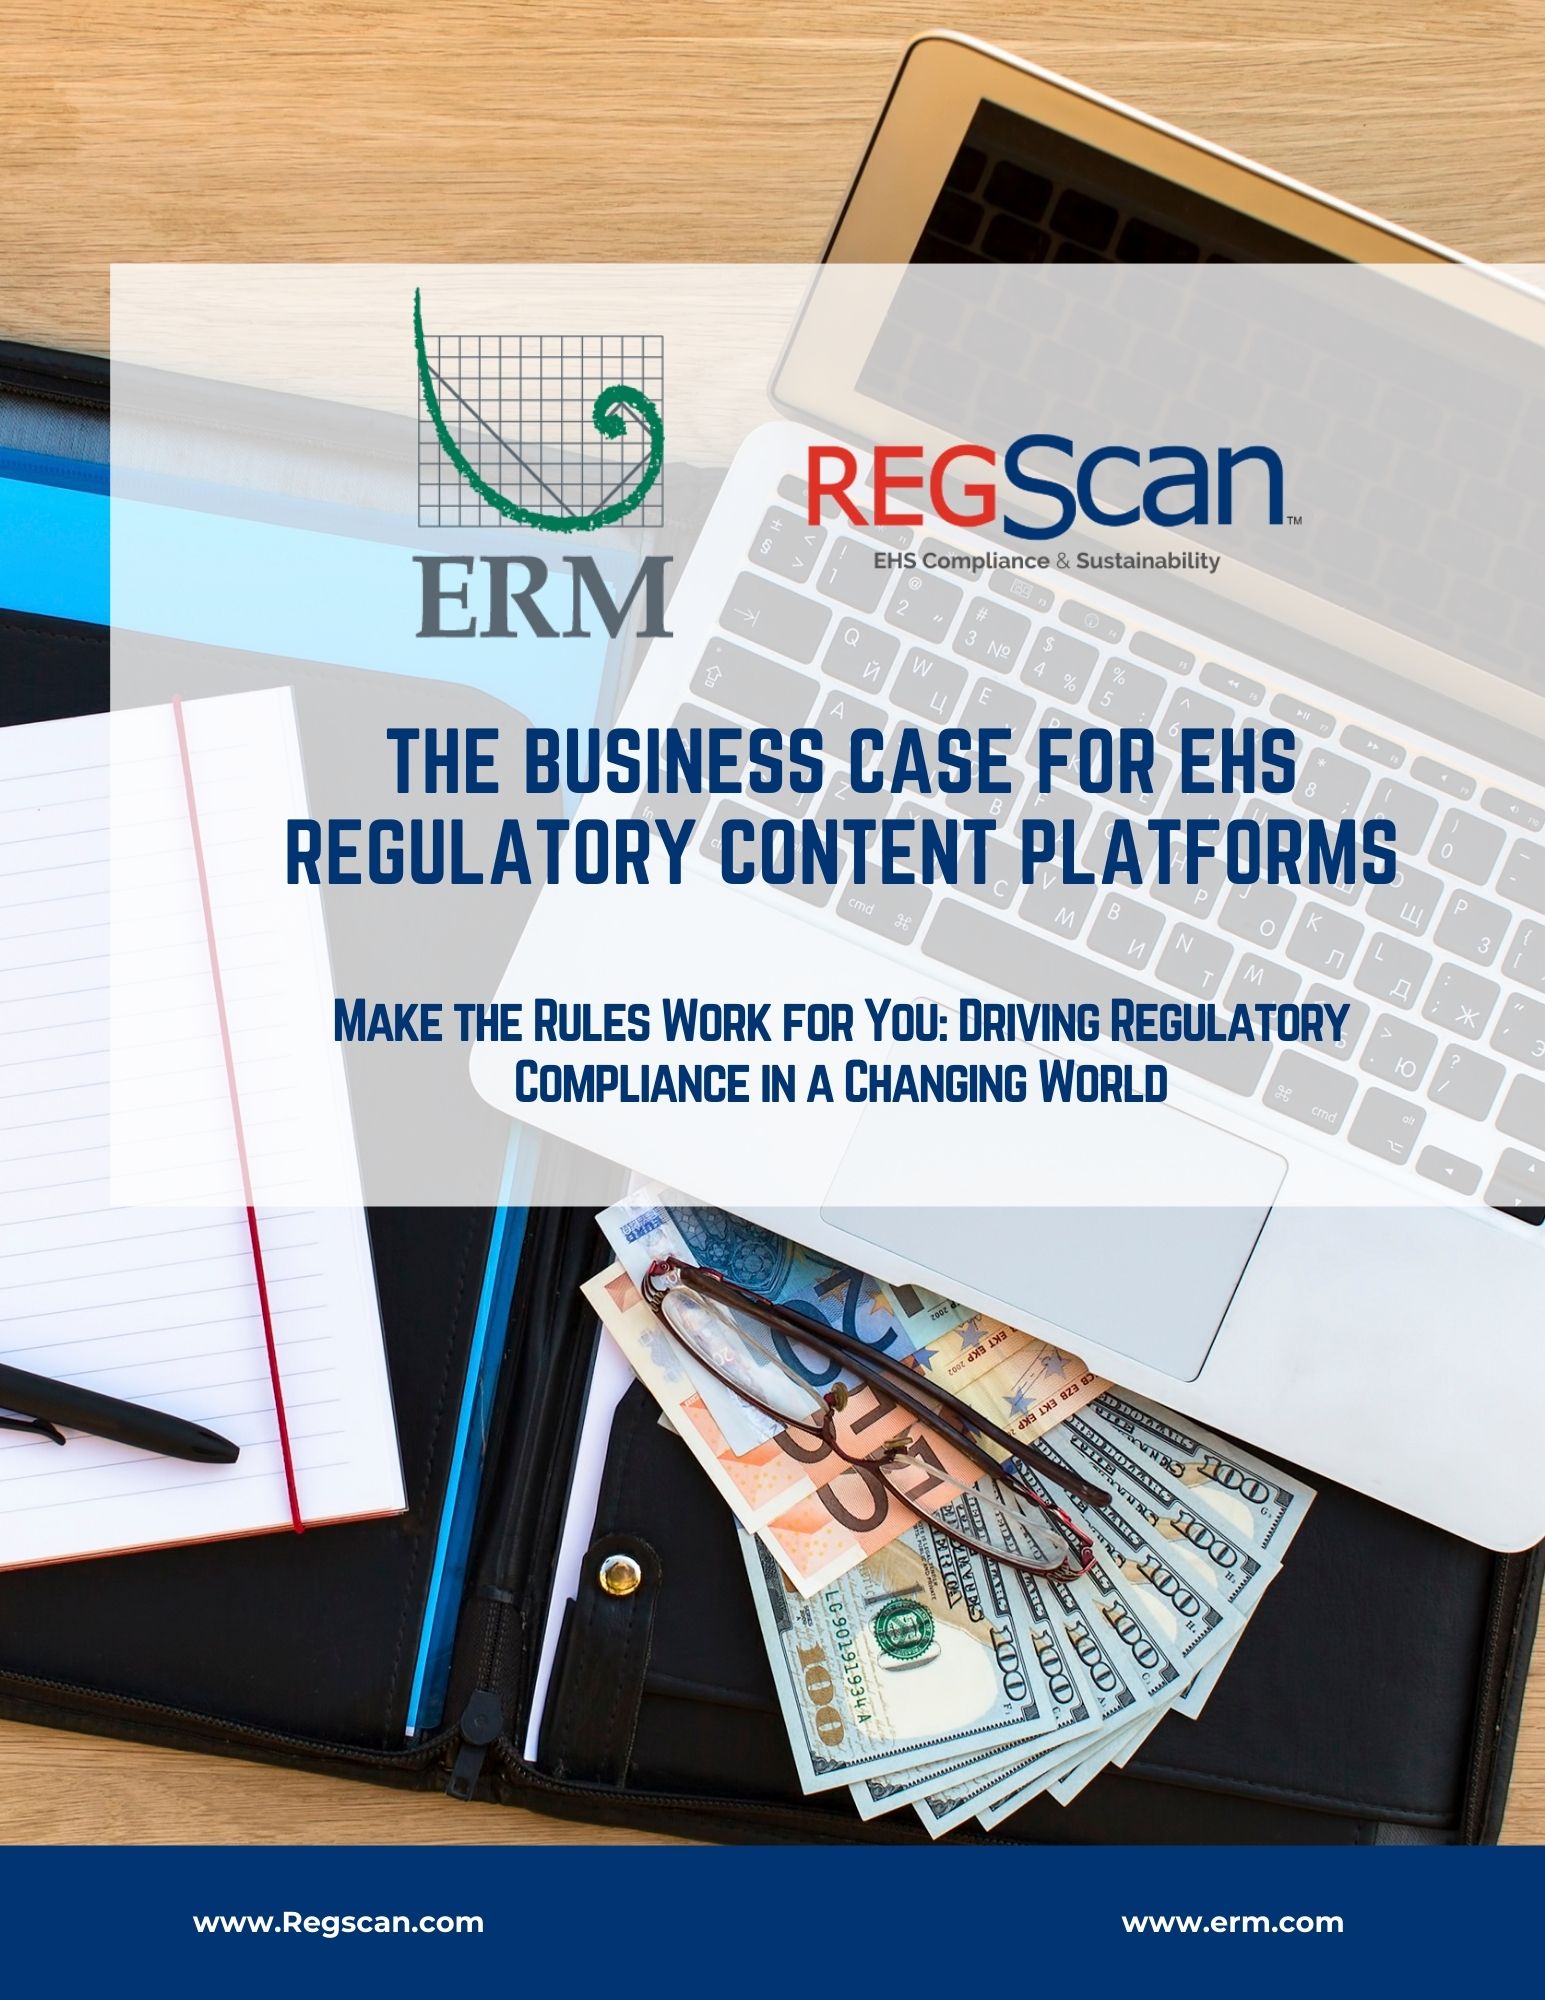 The Business Case for EHS Regulatory Content Platforms